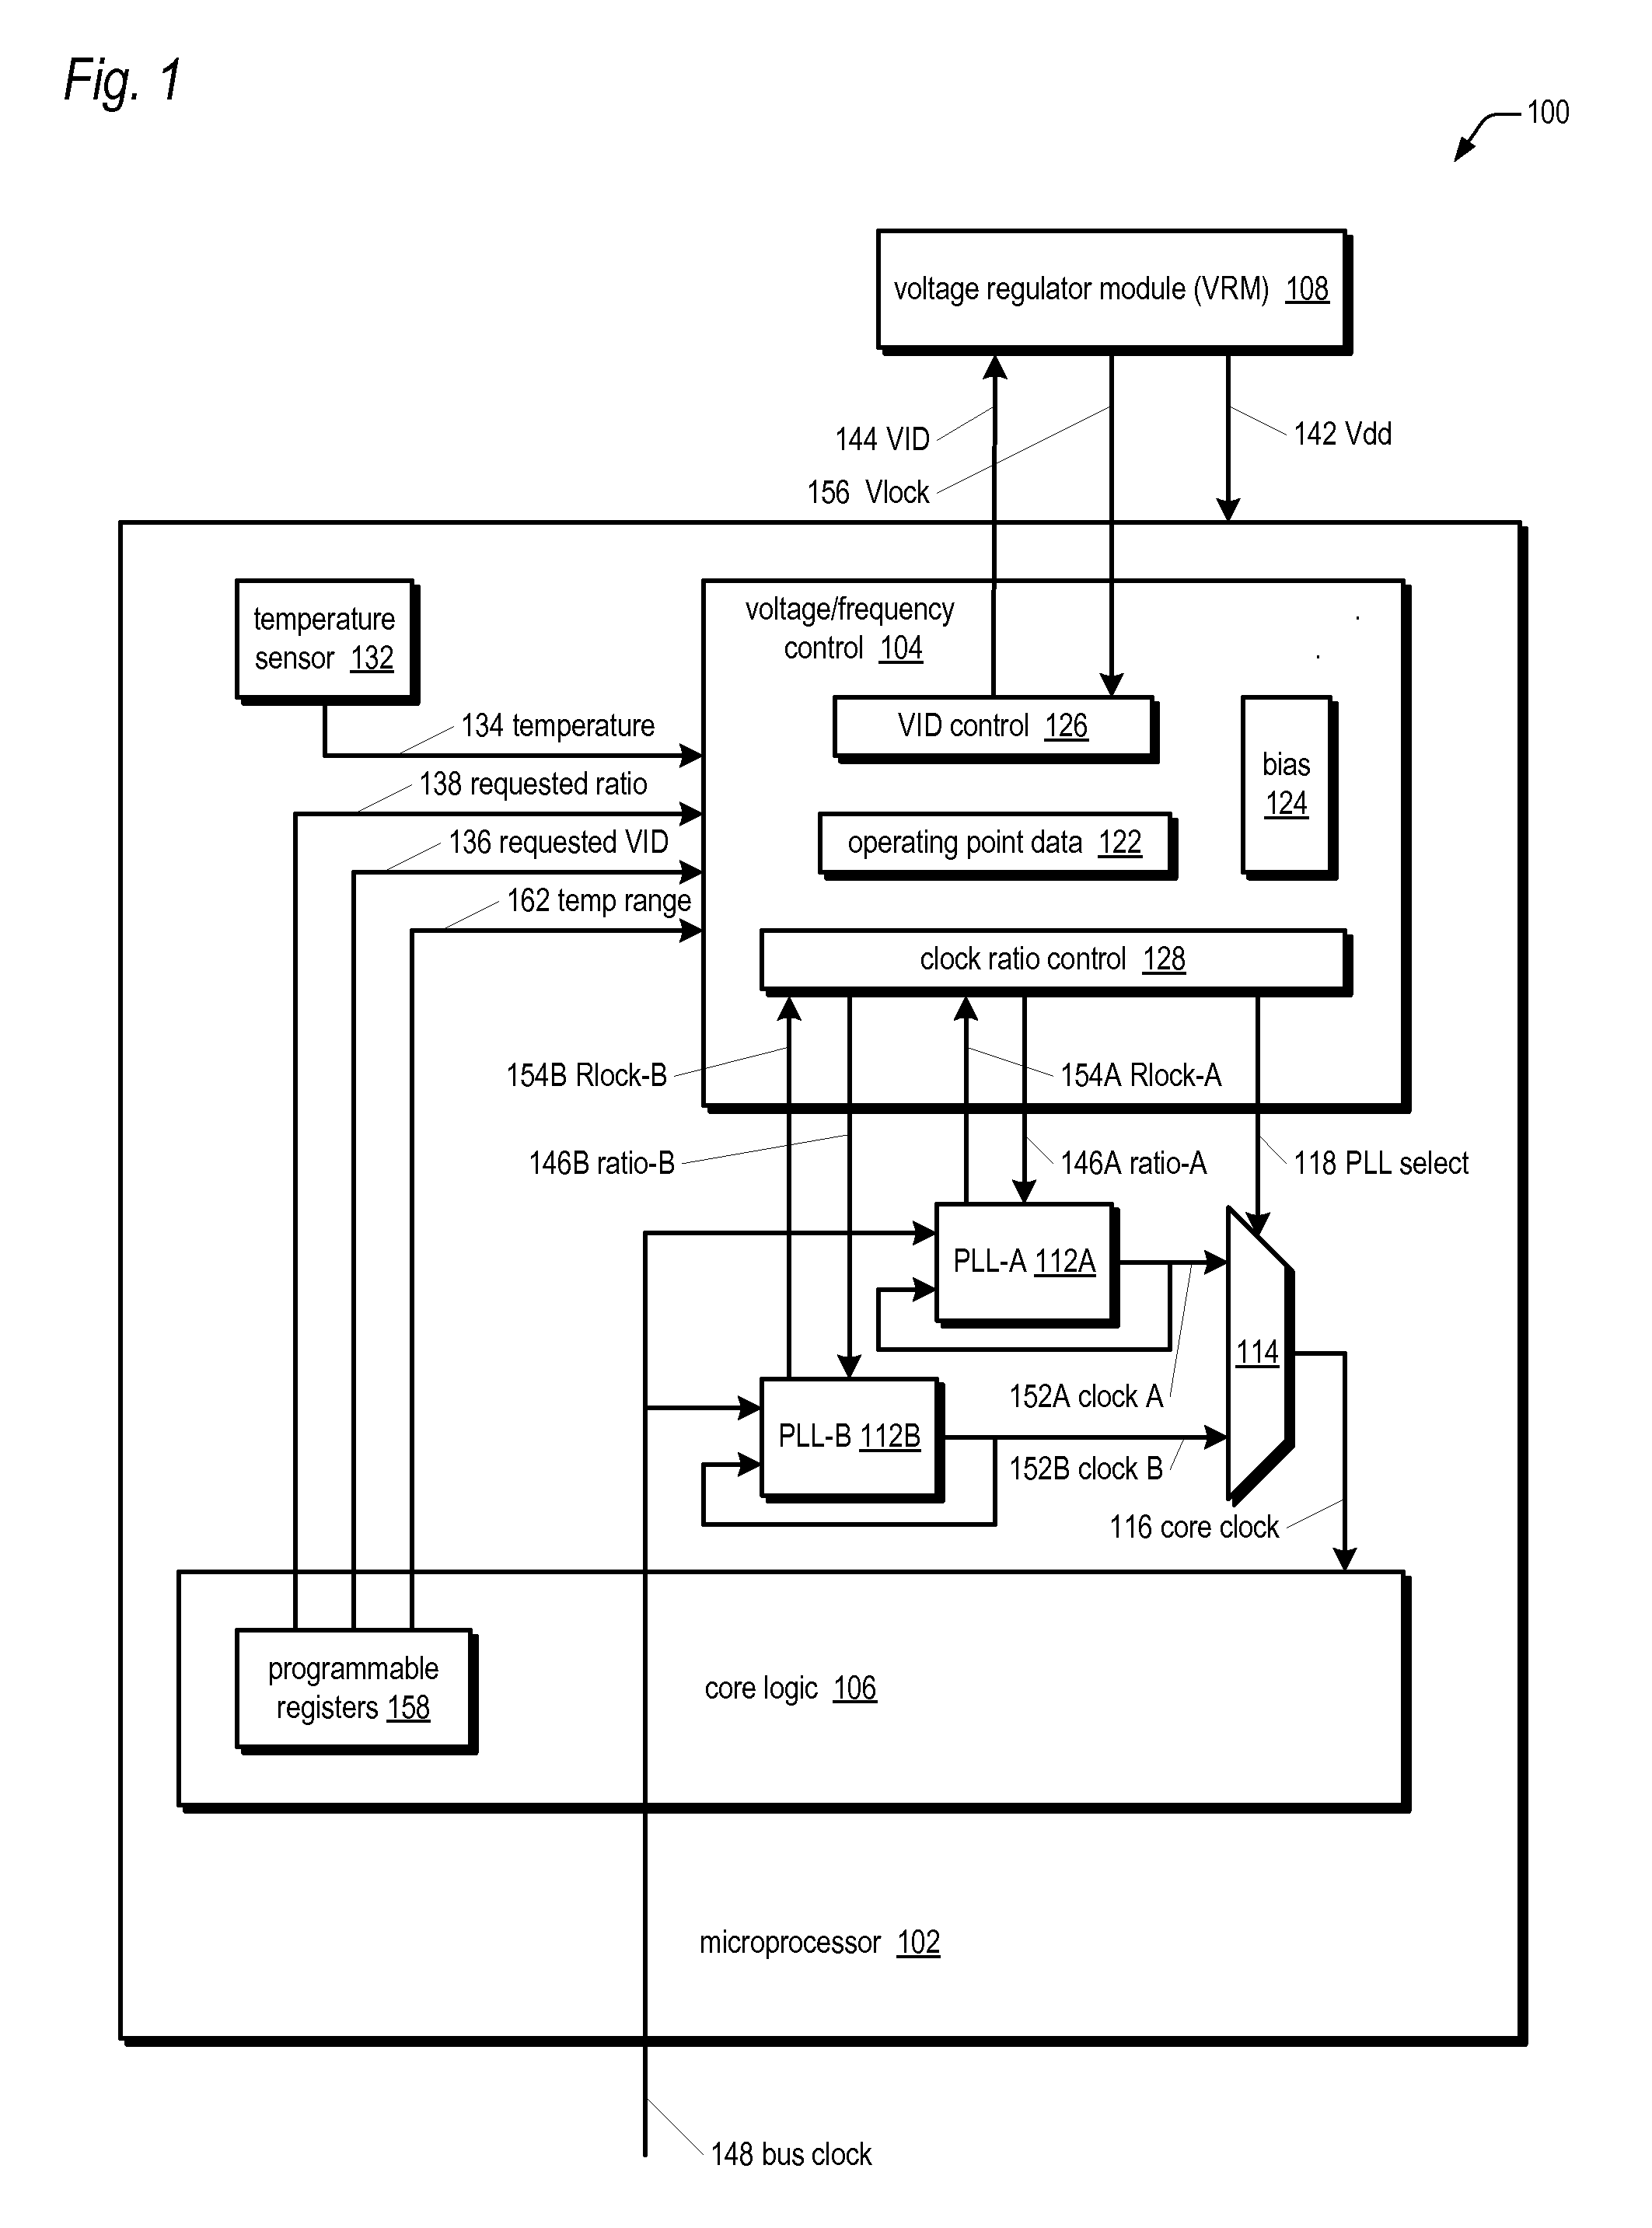 Microprocessor capable of dynamically increasing its performance in response to varying operating temperature